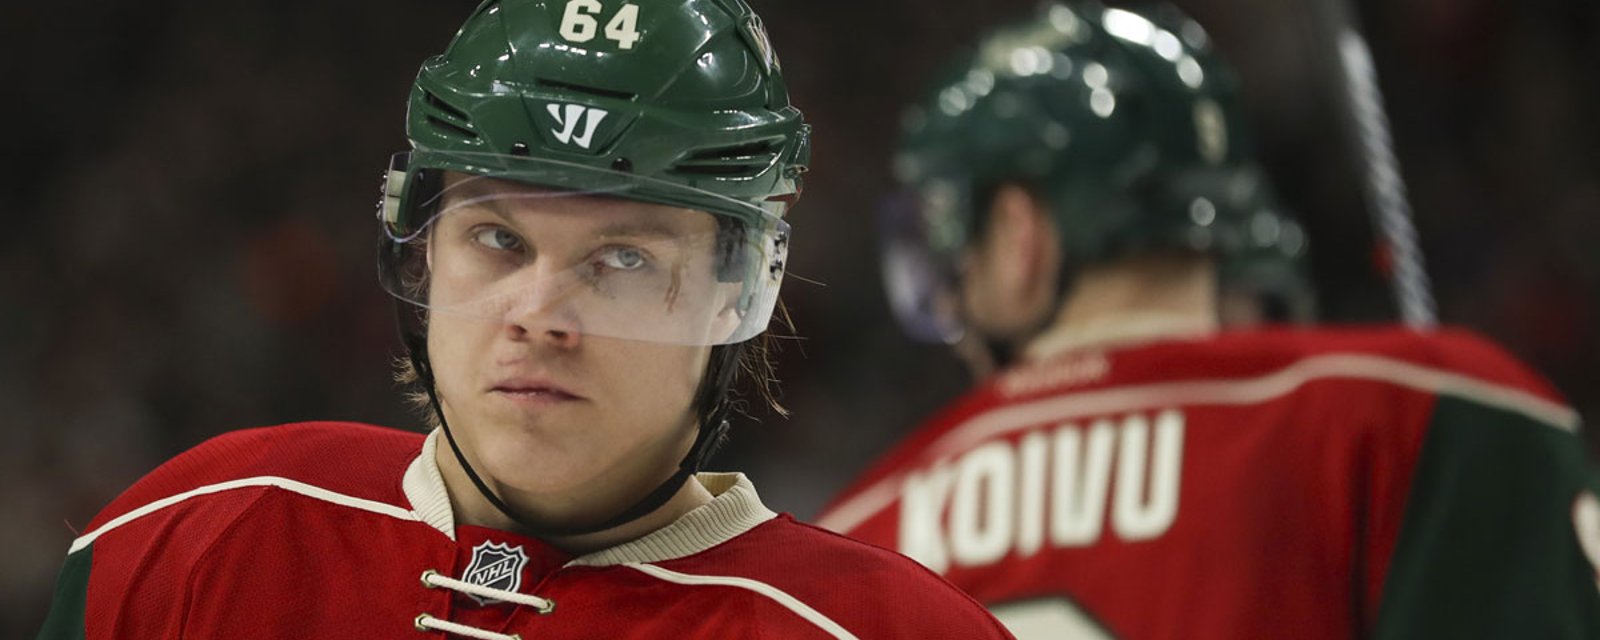 Report: Star player is a possibility for Wild's next game